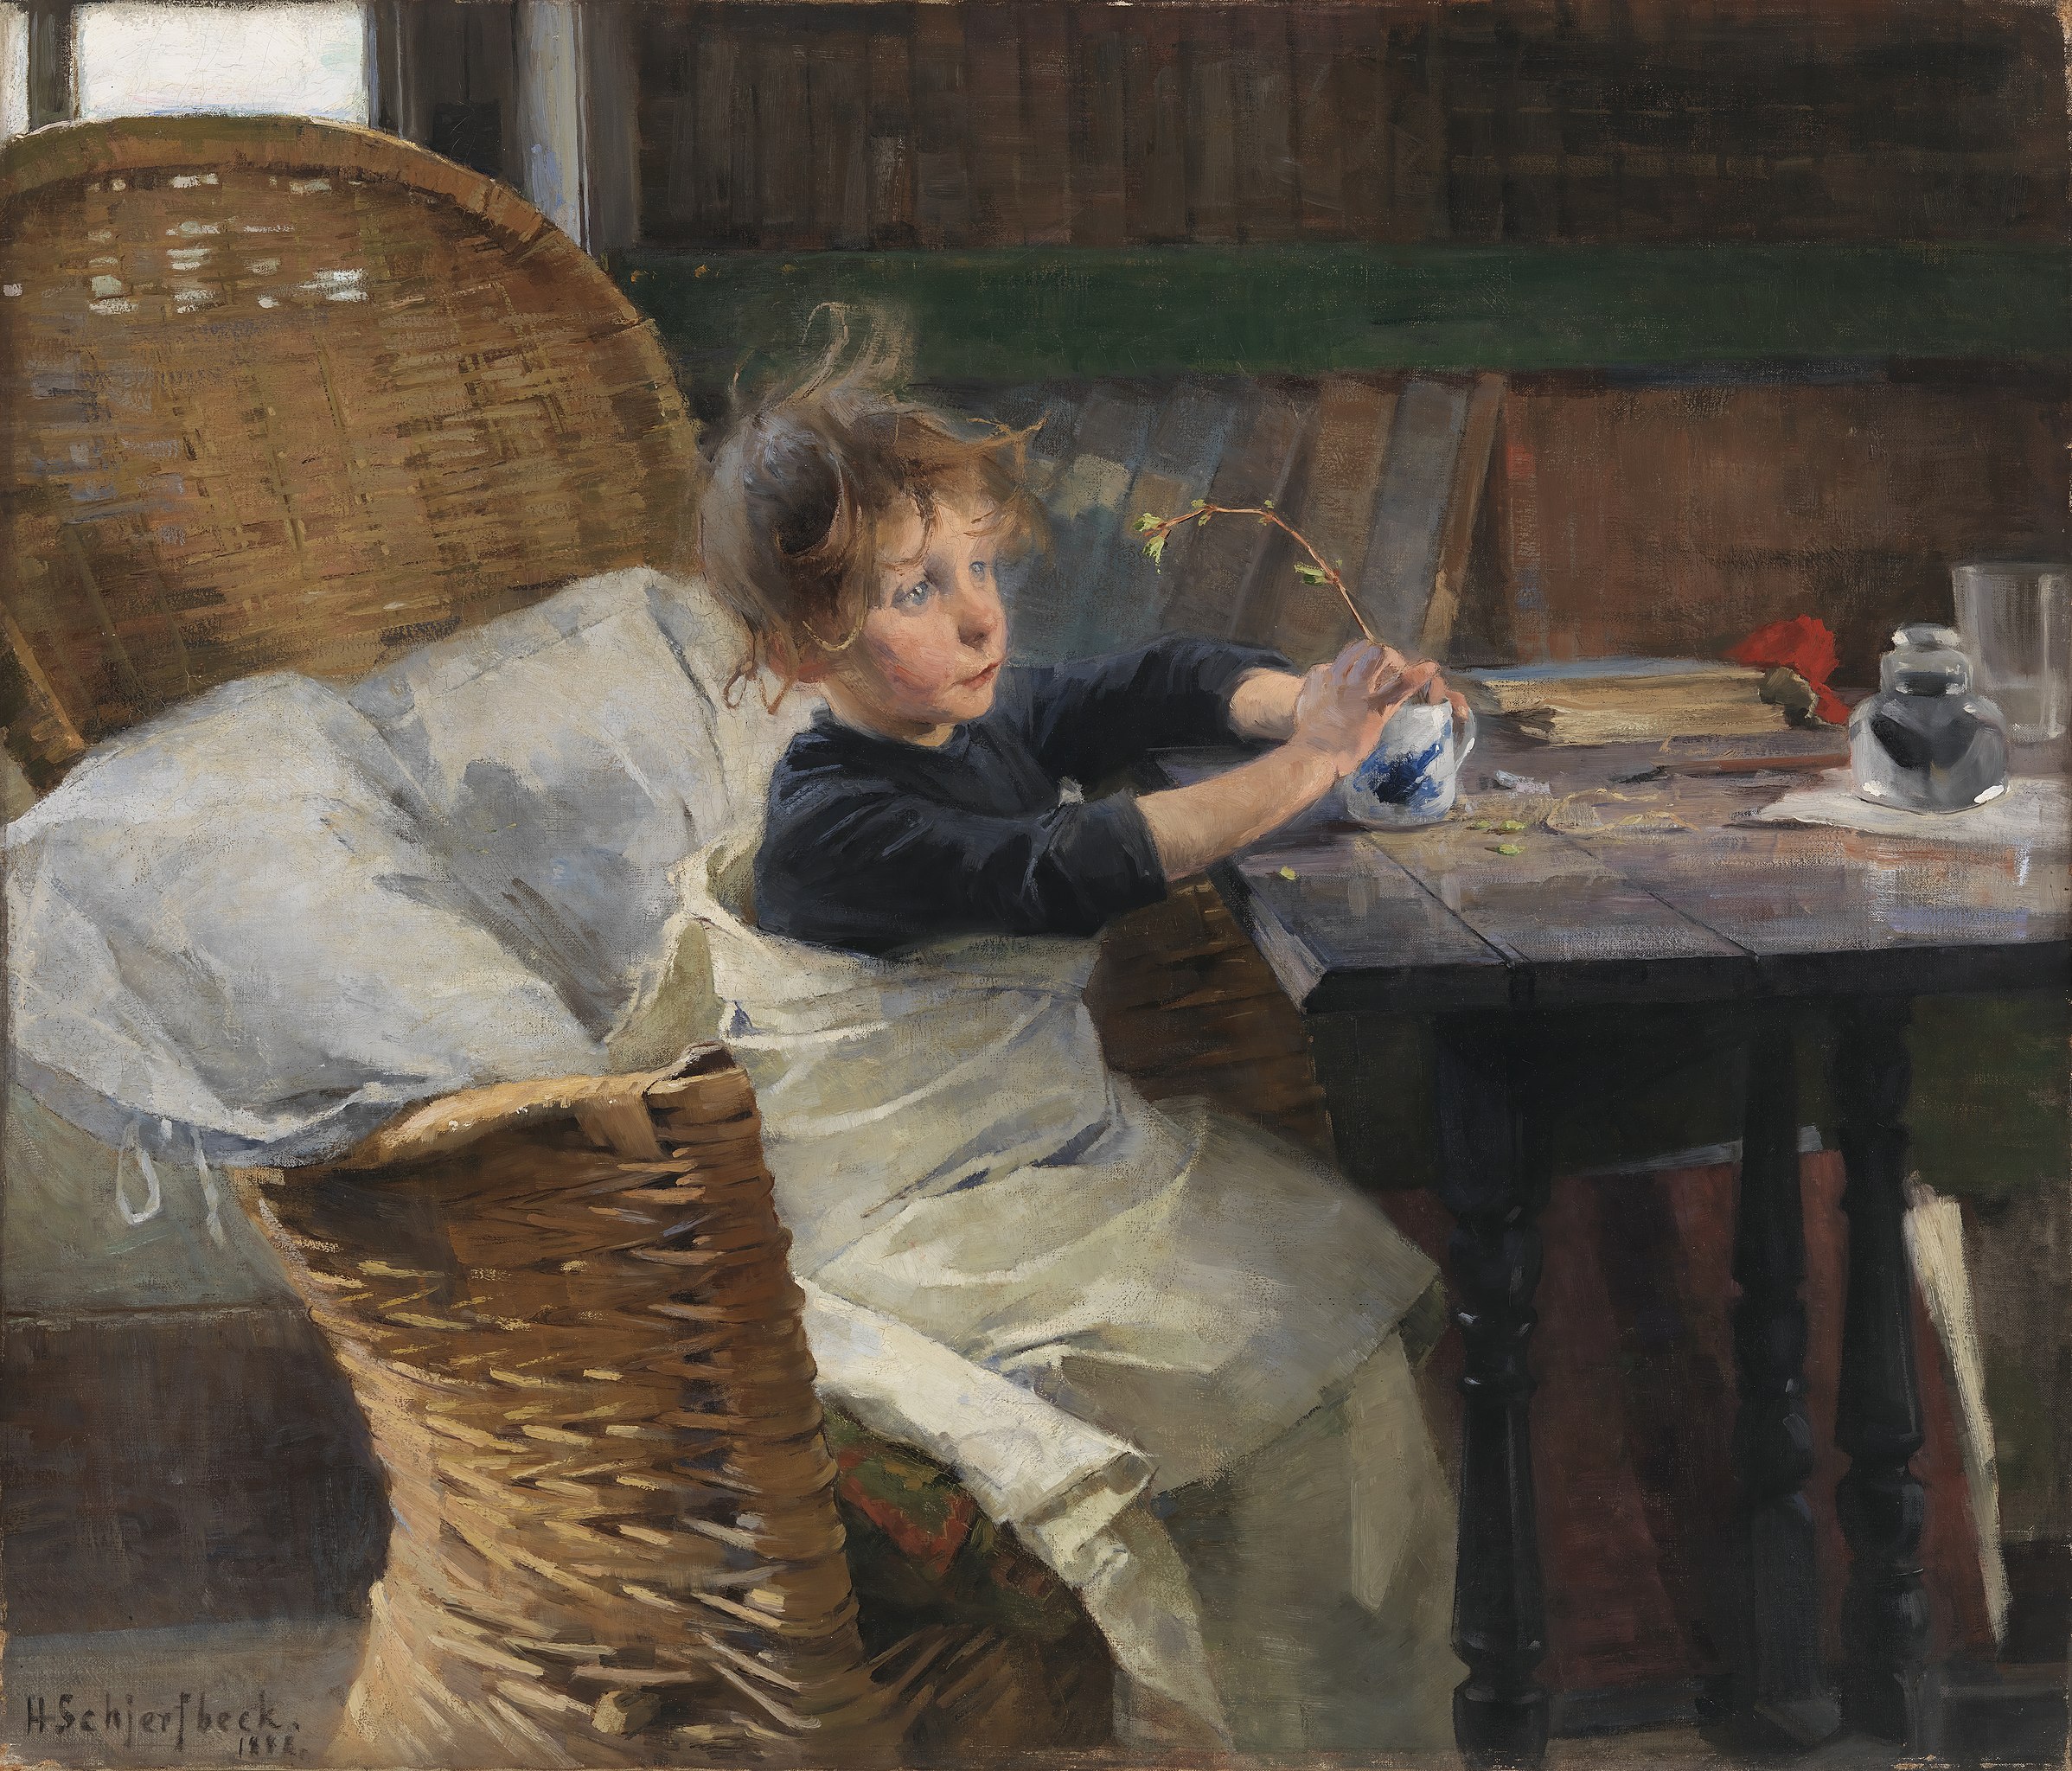 The Convalescent by Helene Schjerfbeck - 1888 - 92 x 107 cm Europeana